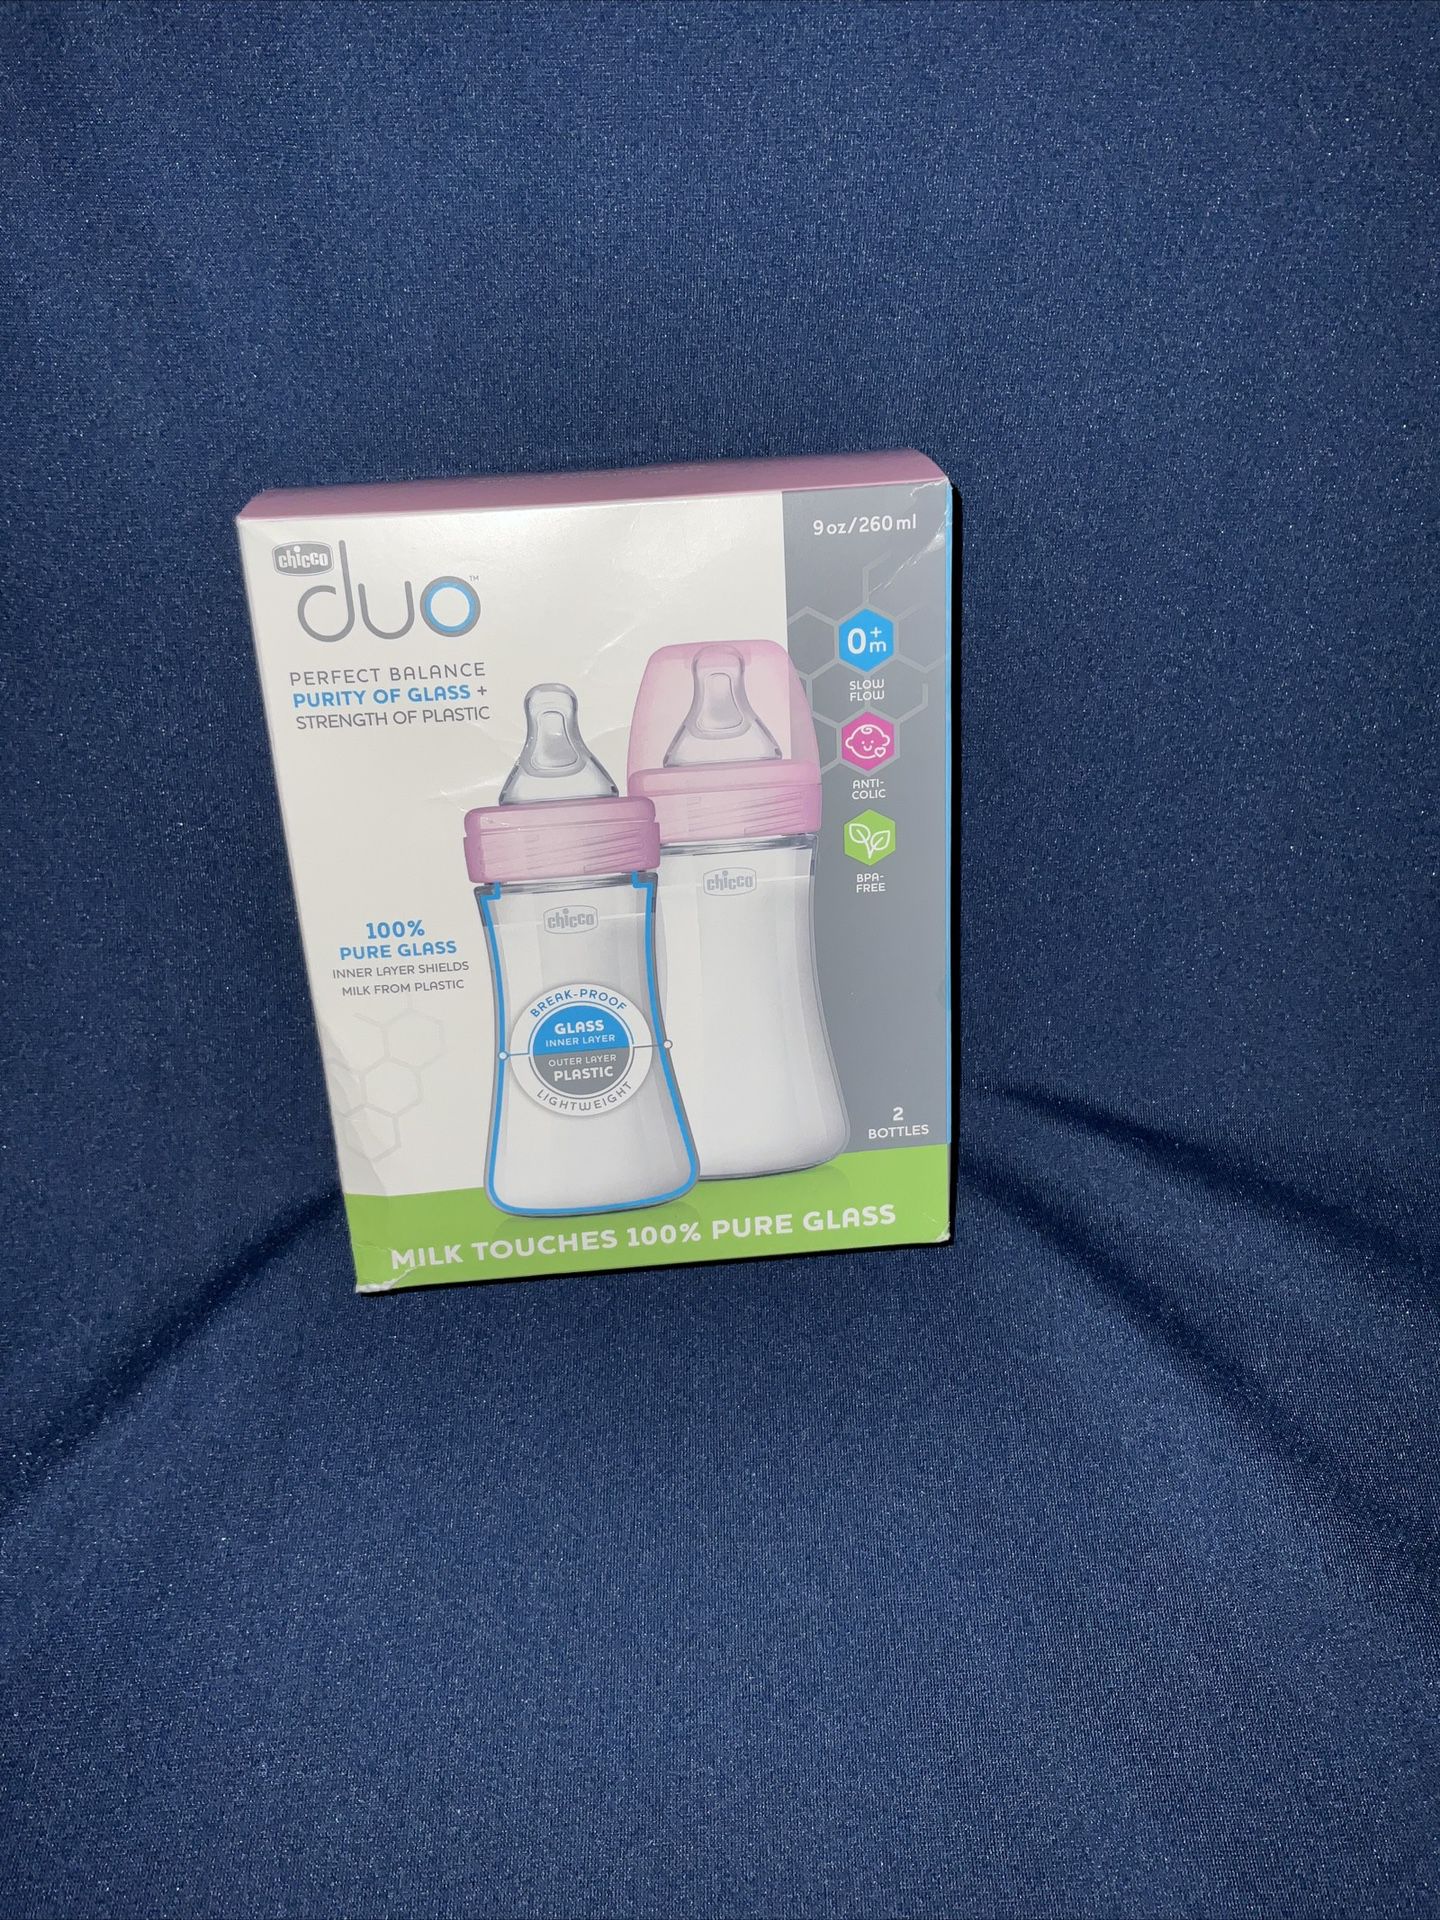 Chicco Duo Hybrid Pink Lids Baby Bottles Invinci-Glass 9 oz each (Set of 2)